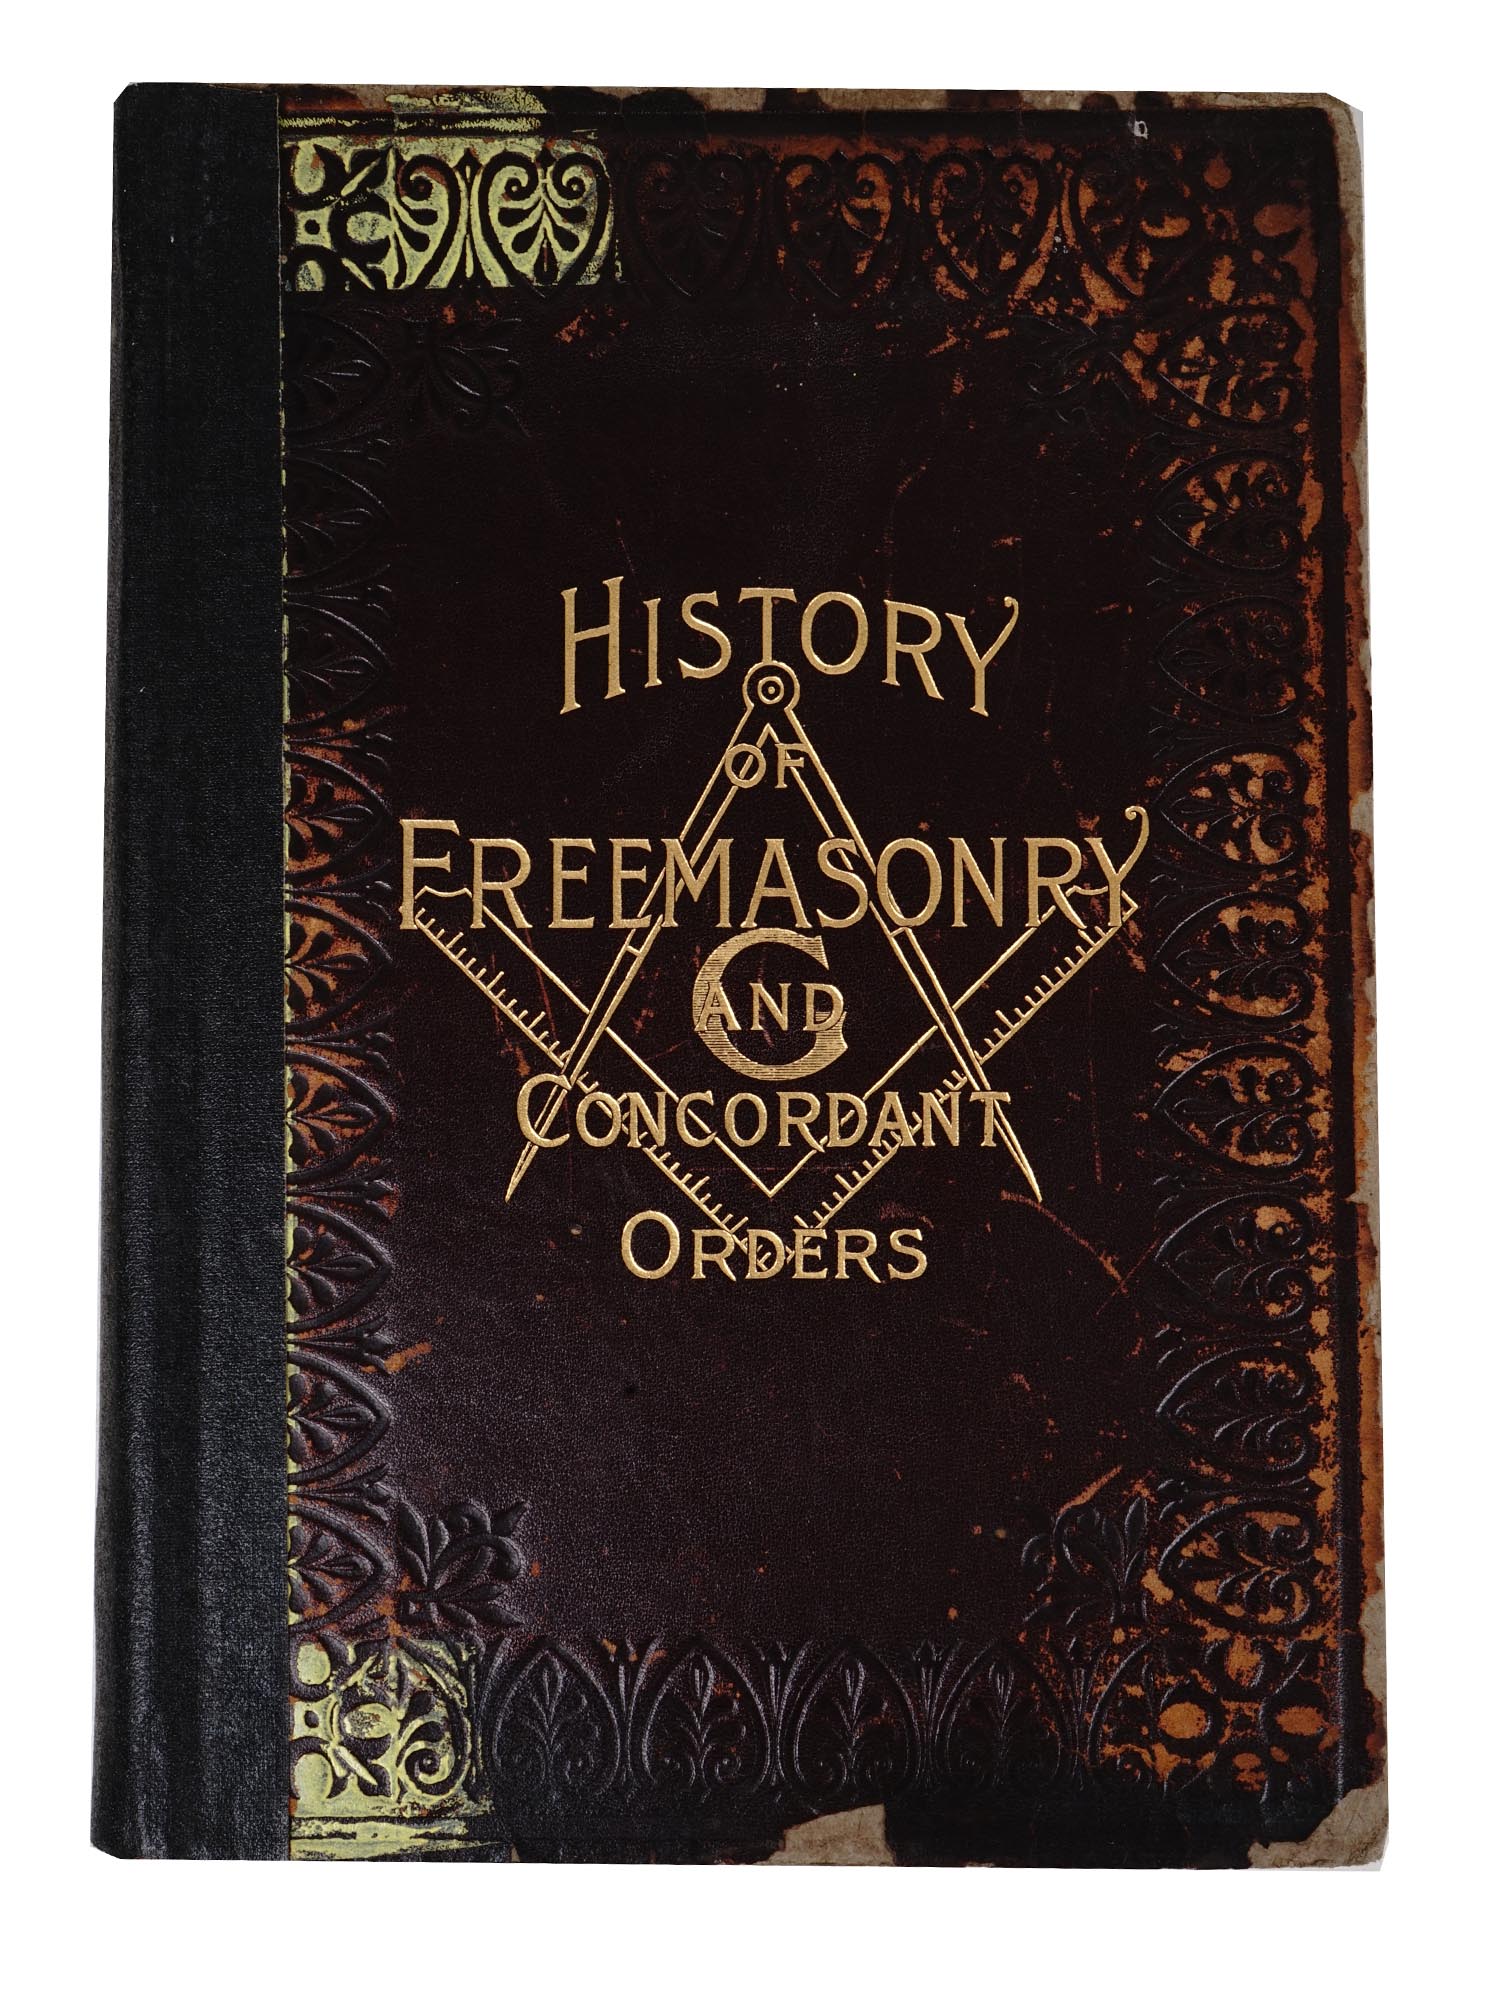 ANTIQUE 1893 EDITION OF HISTORY OF MASONS PIC-0